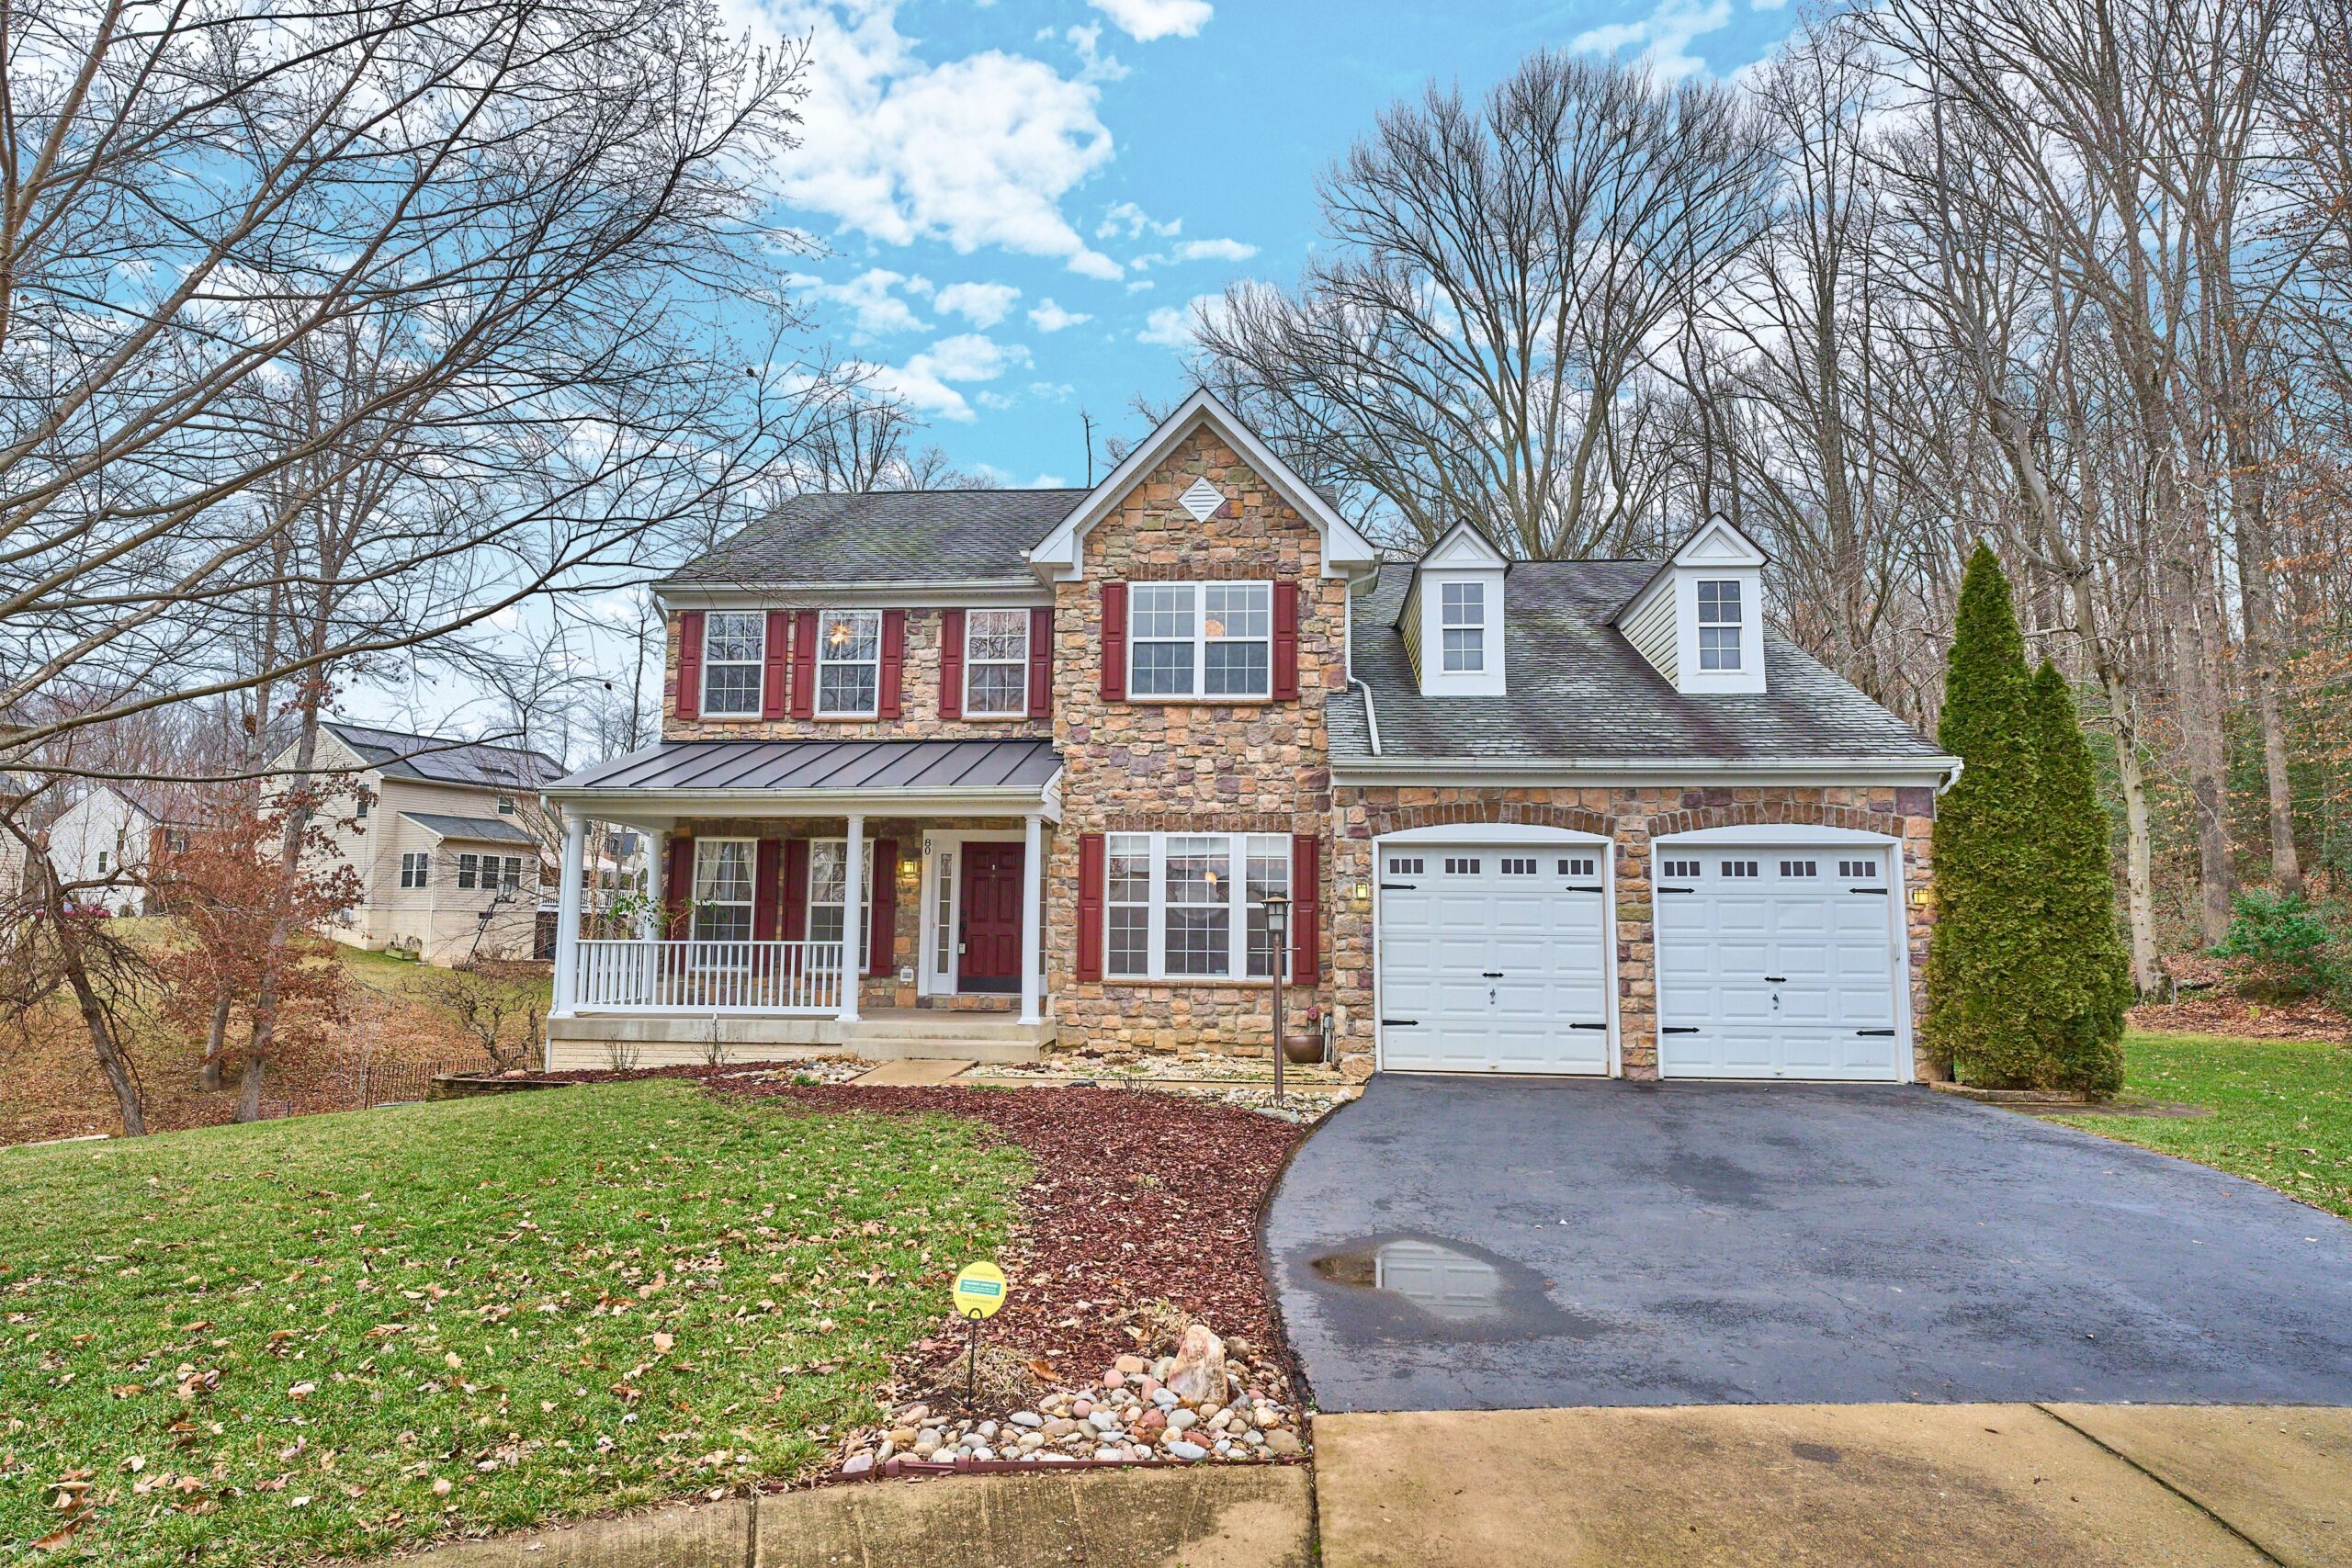 Professional exterior photo of 80 Brentsmill Drive in Stafford, Virginia - showing the front stone facade and 2 white garage doors